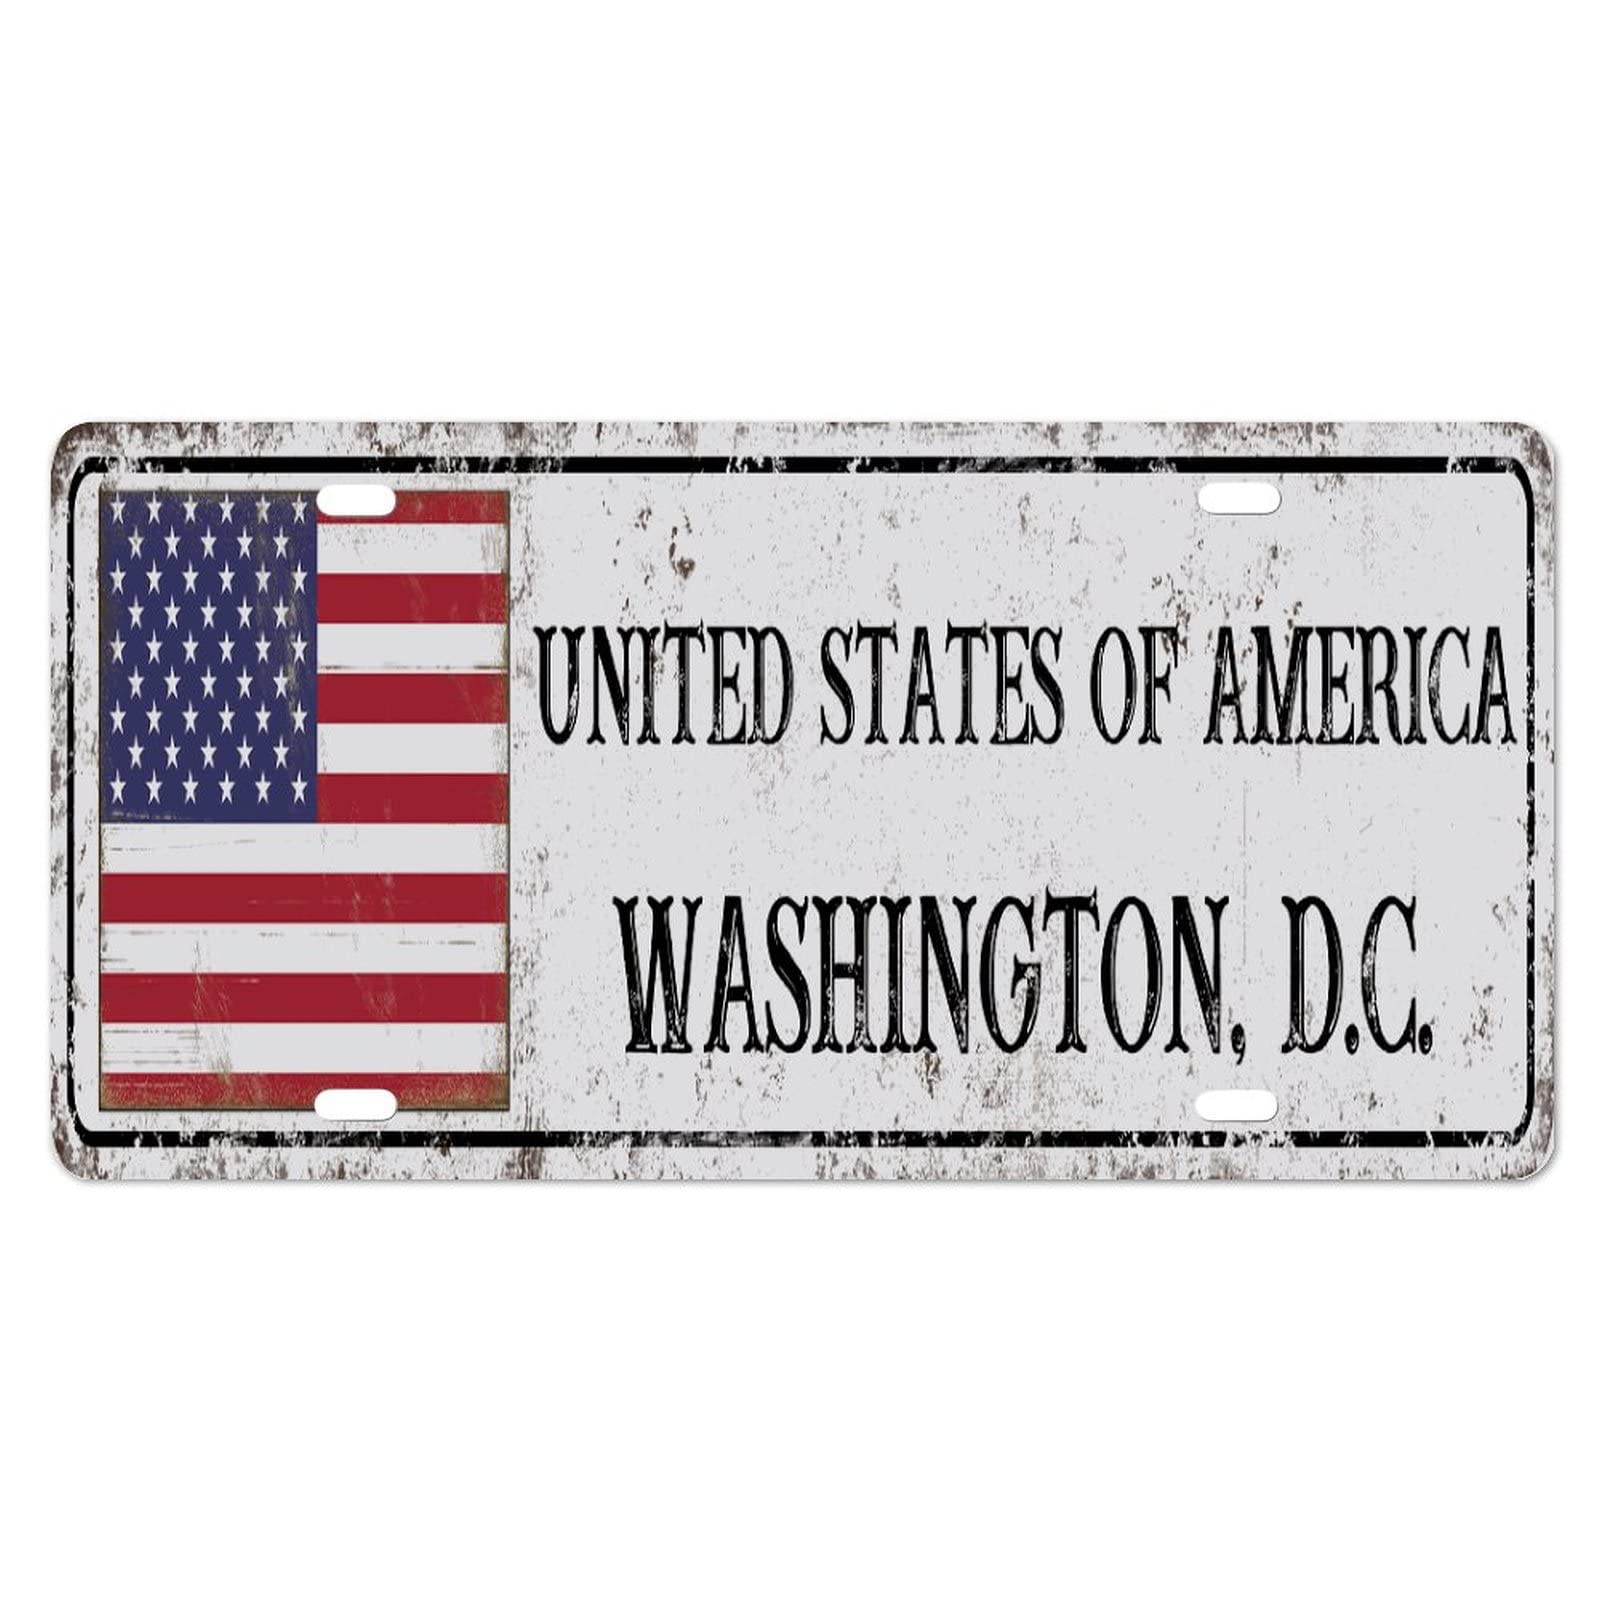 Yelolyio United States Of AmericaLicense Plate for Front of Car Size 6x12 Inch Rust-Free Washington, DC Metal License Plate United States Of America National Flag Aluminum Novelty License Plate Car von Yelolyio